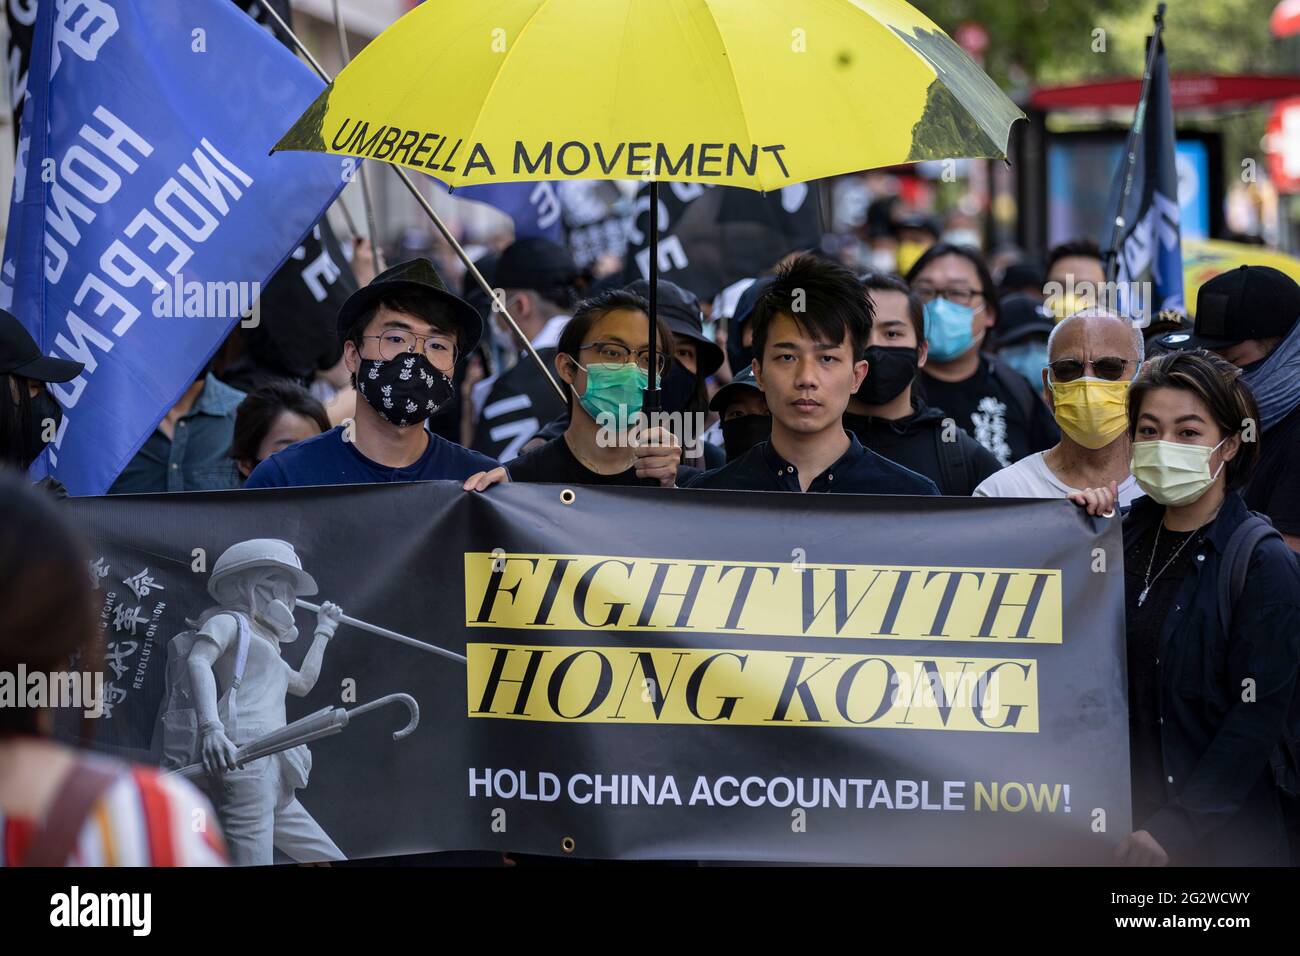 London Uk 12th June 21 Pro Democracy Activists Simon Cheng L Finn Lau C Hold Banner That Reads Fight With Hong Kong During A Rally In London Uk On June 12 21 To